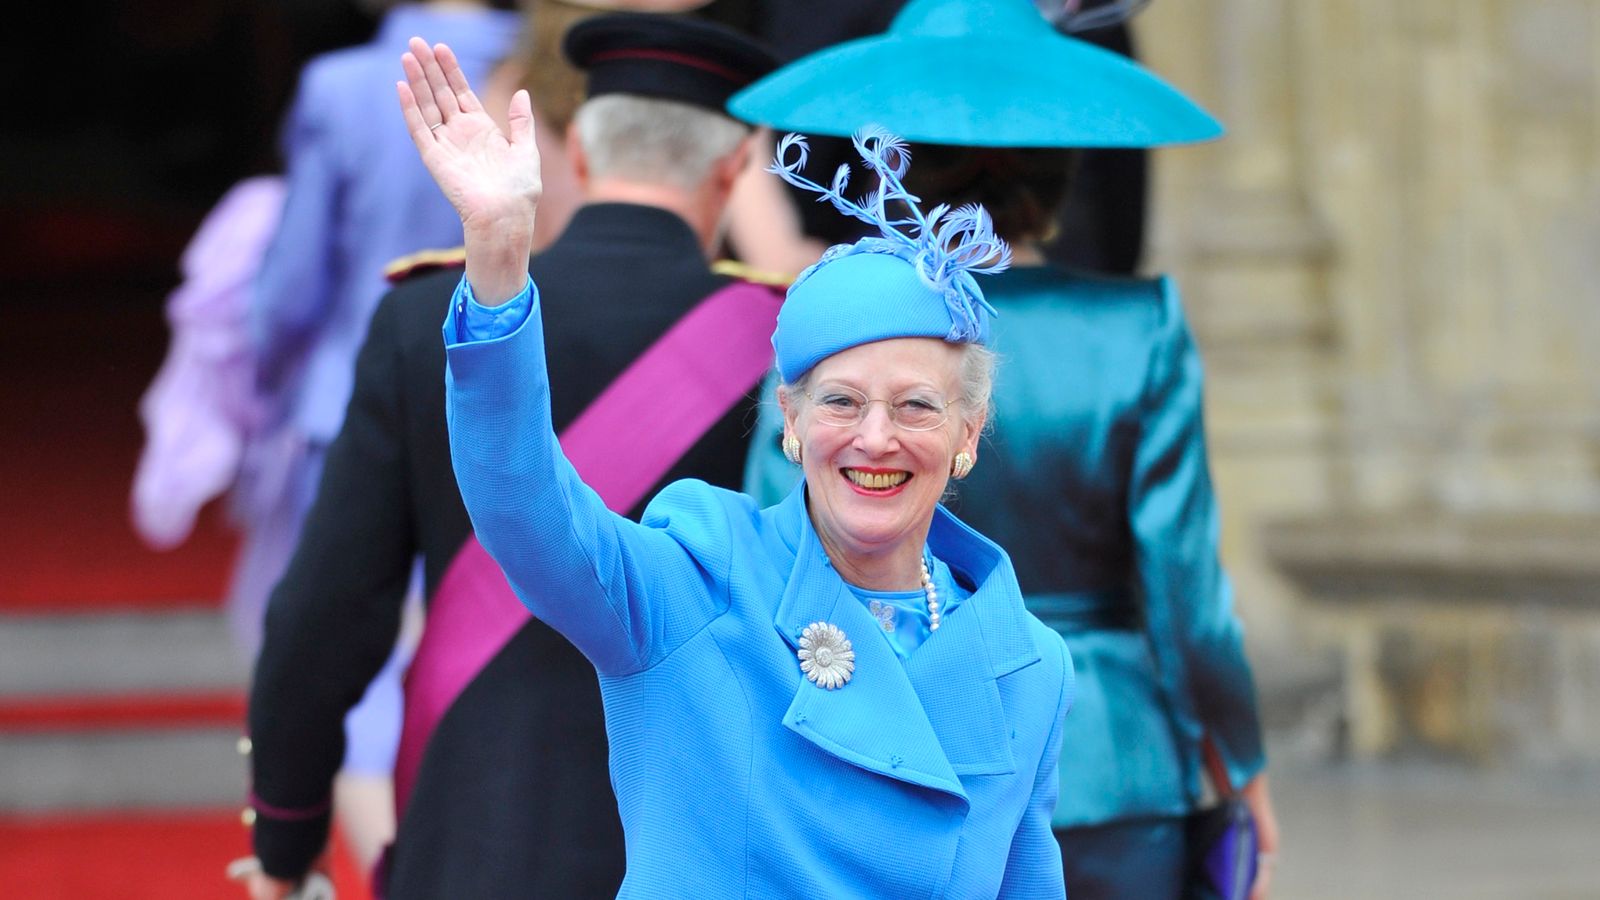 Queen Margrethe listens to public sing on eve of abdication